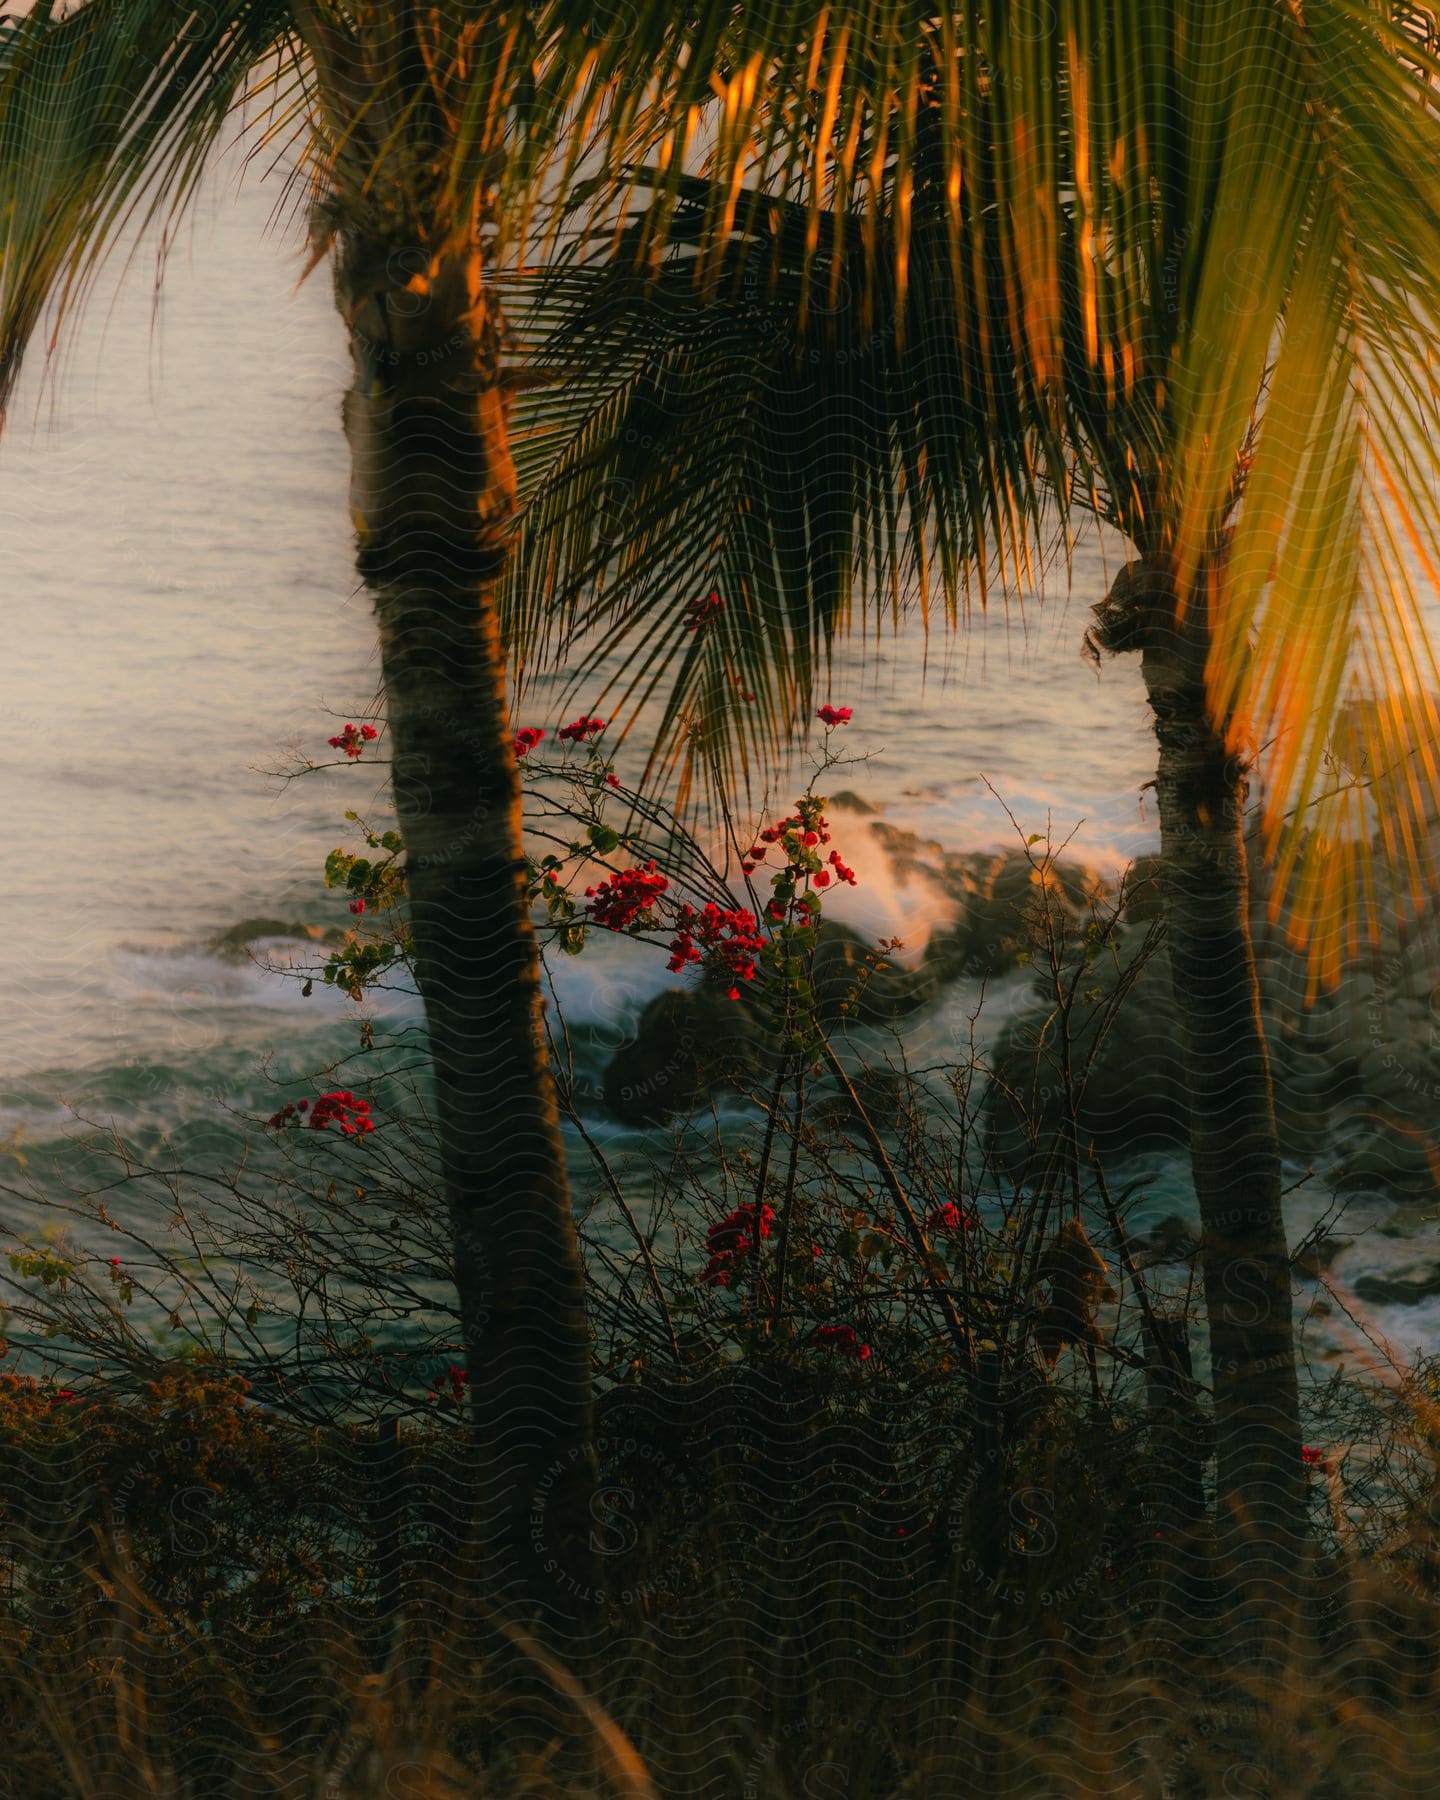 A small monkey sits in a flower bush under palm trees overlooking the beach.